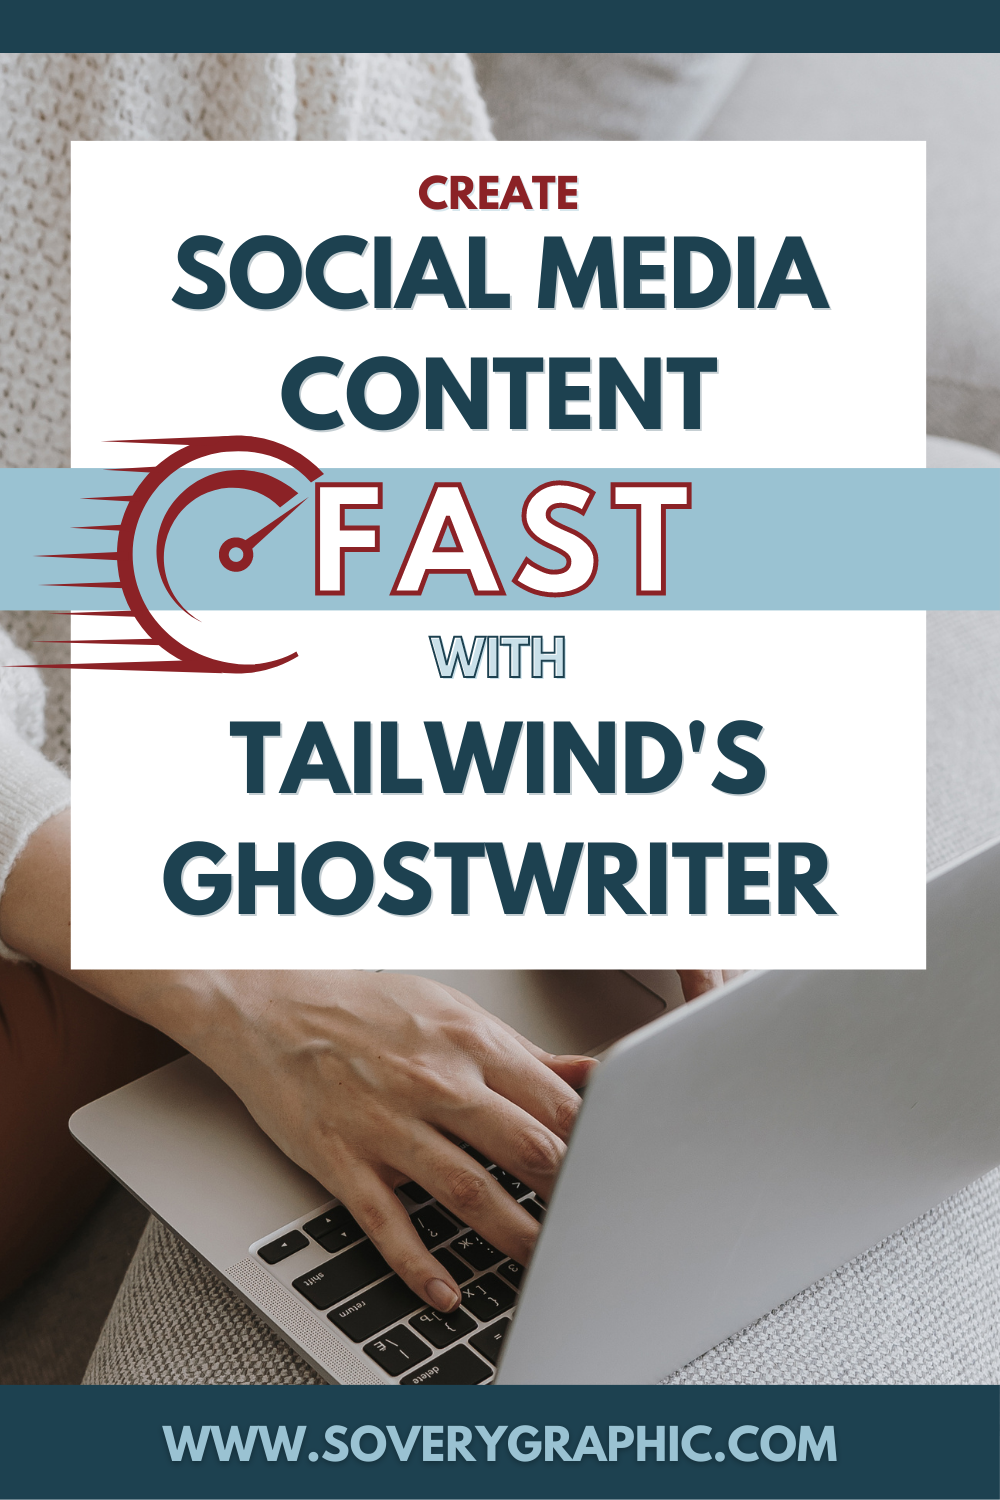 Create Social Media Content FAST with Tailwind's Ghostwriter AI | So Very Graphic Designs